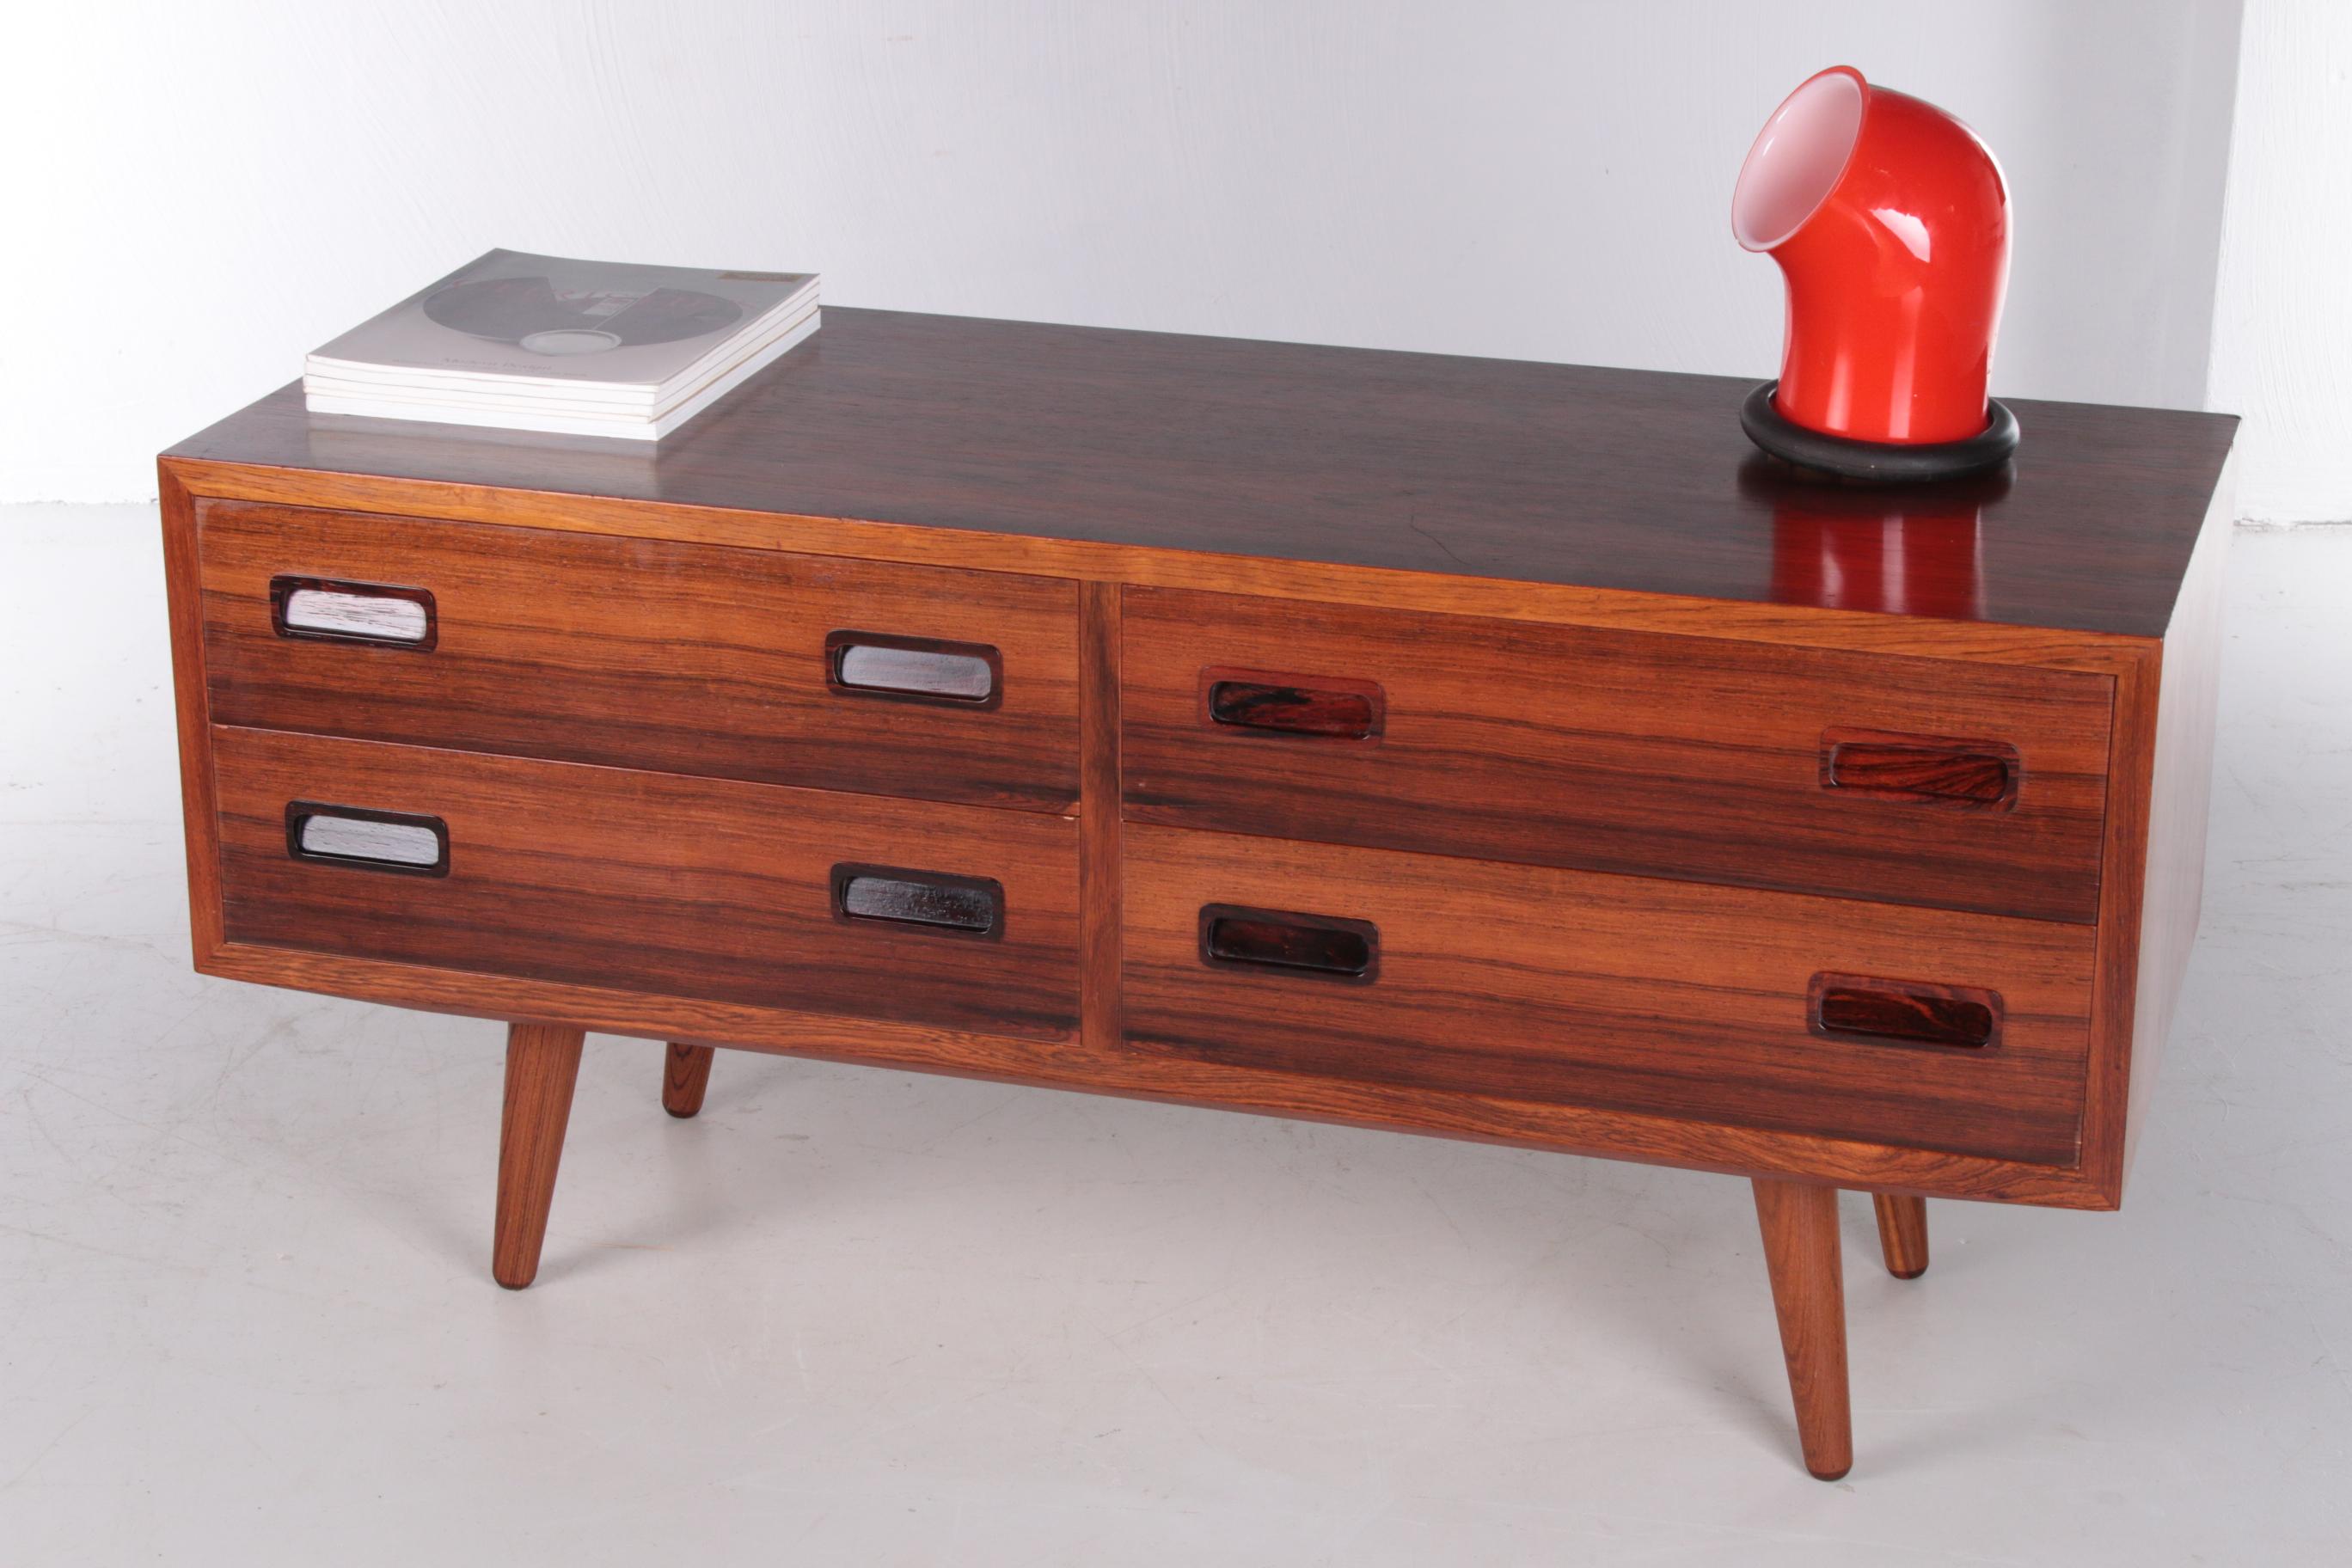 This low sideboard with four drawers is a must have in your living room and is quintessential Hundevad & Co.

Very functional, made with an eye for detail and with high-quality materials.

It is the perfect match between form and